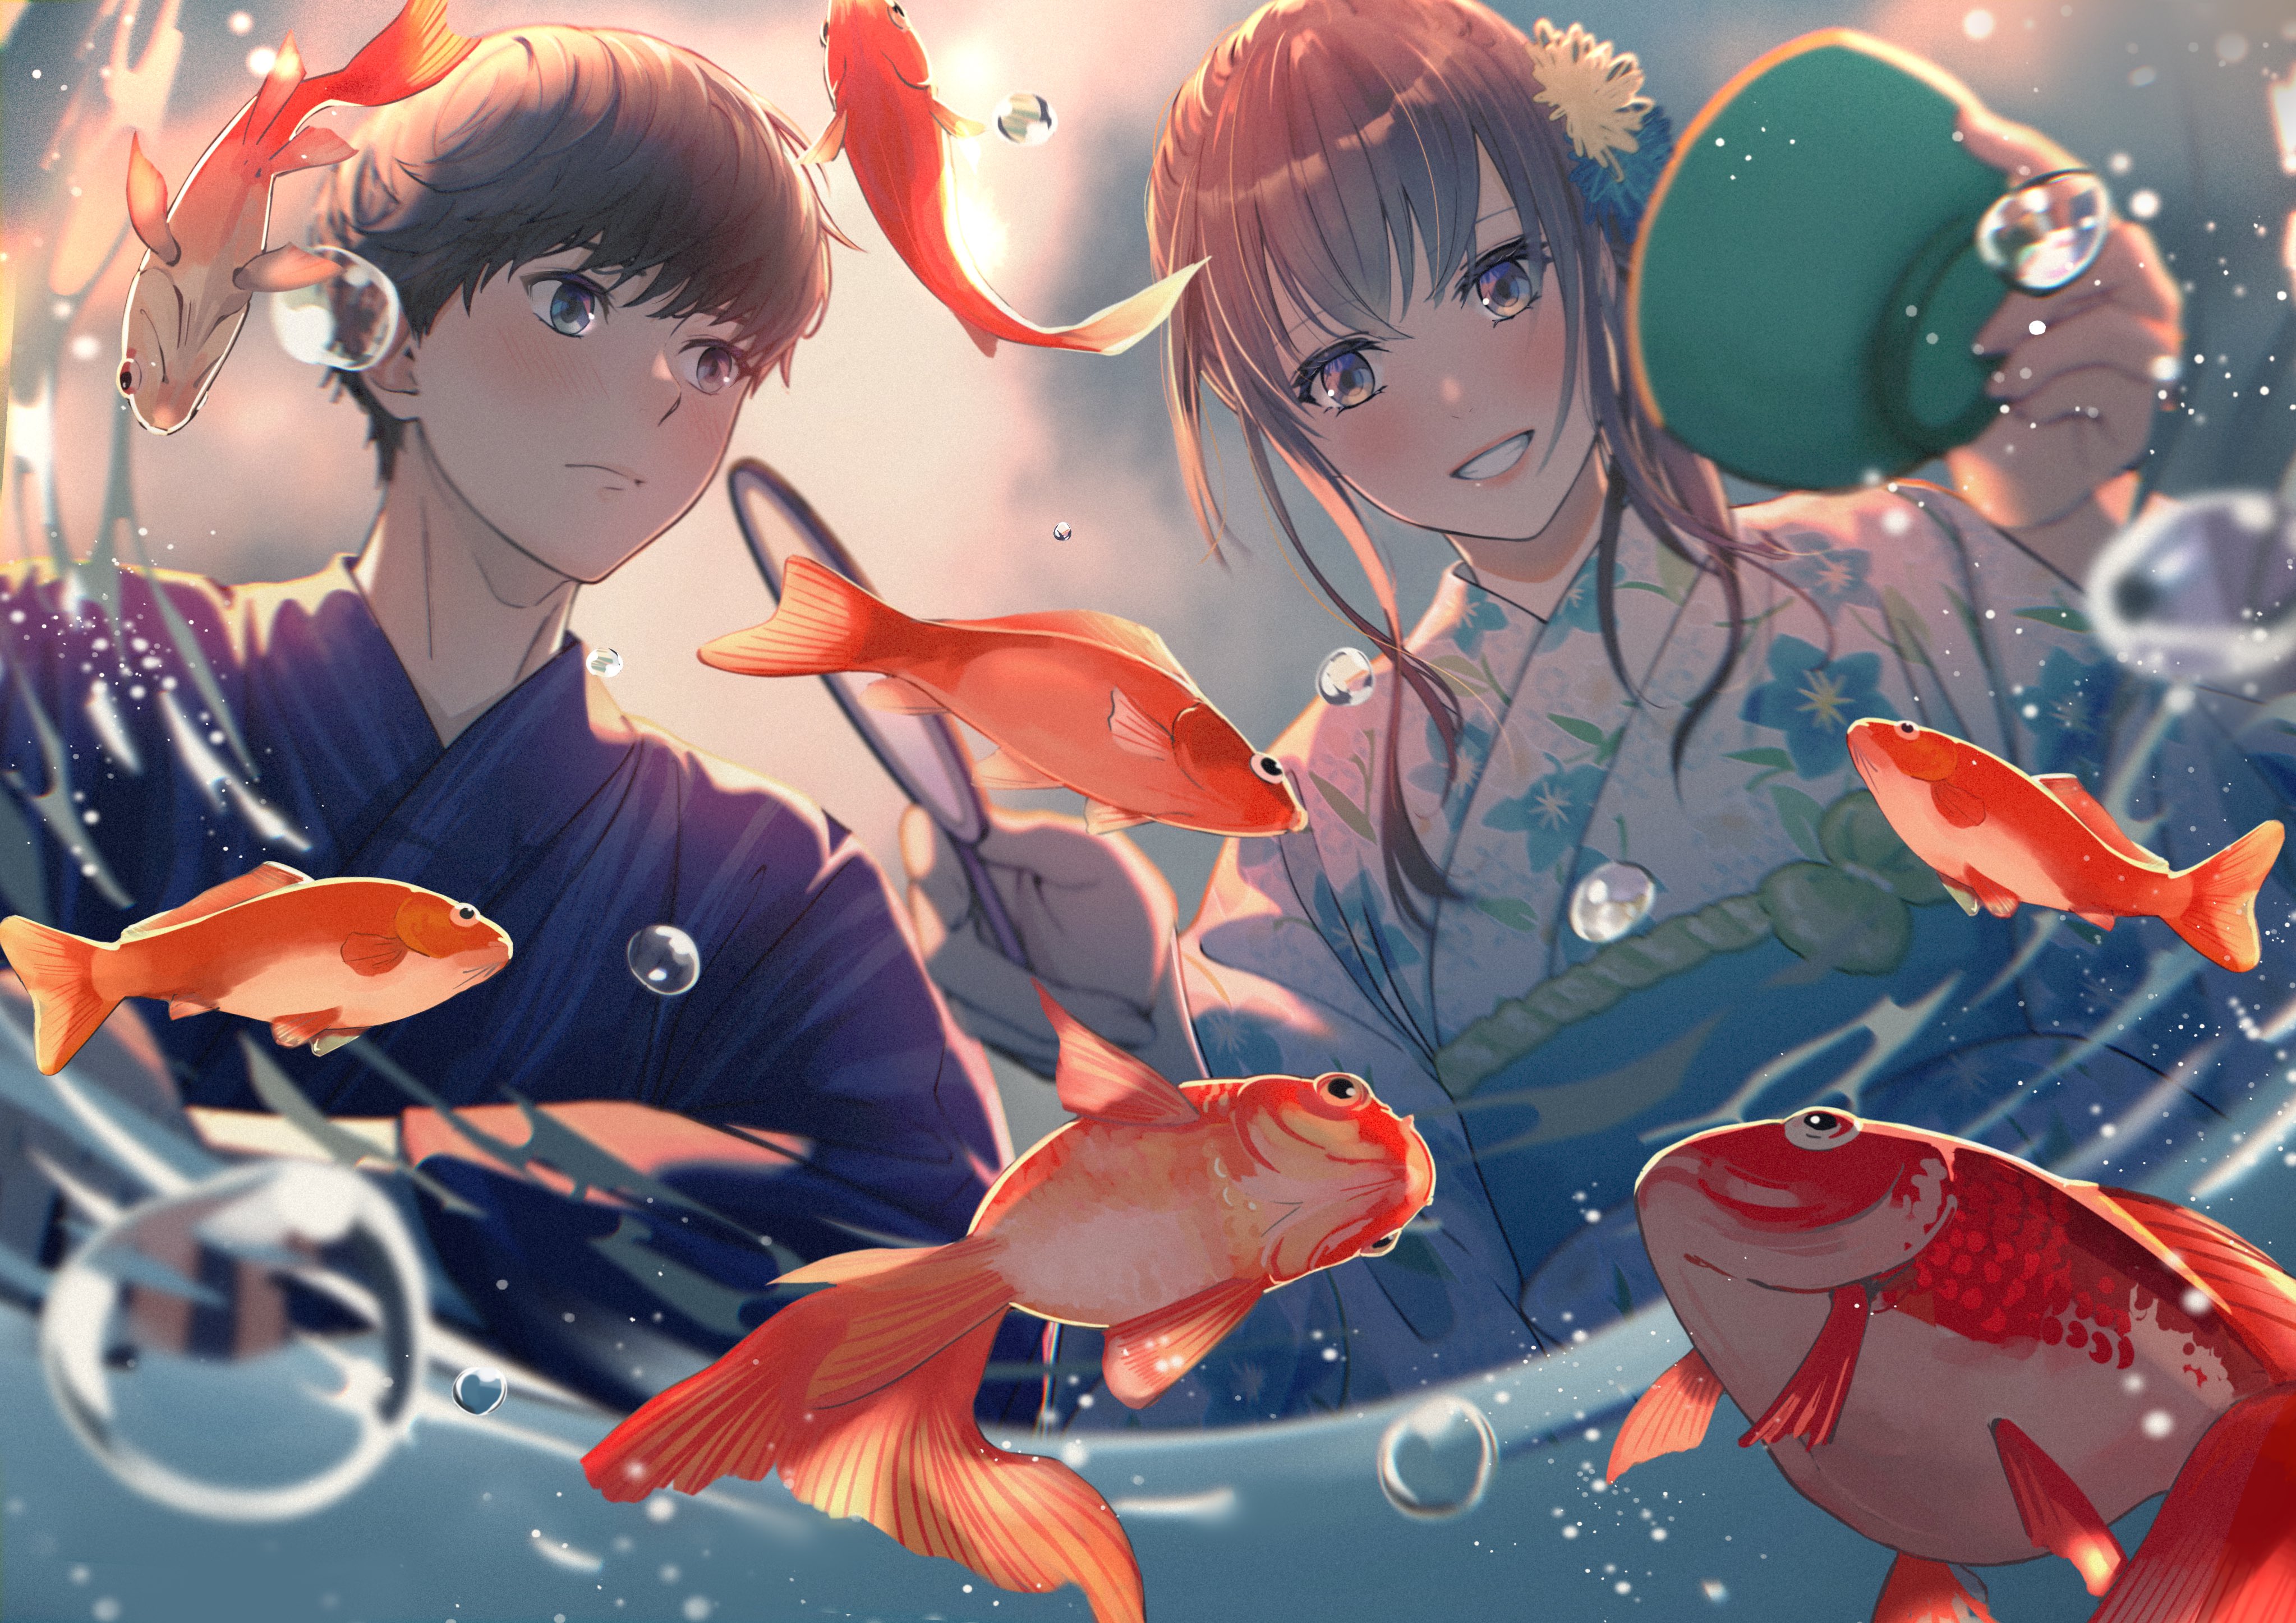 Anime girl surrounded by giant red fish by reinforced